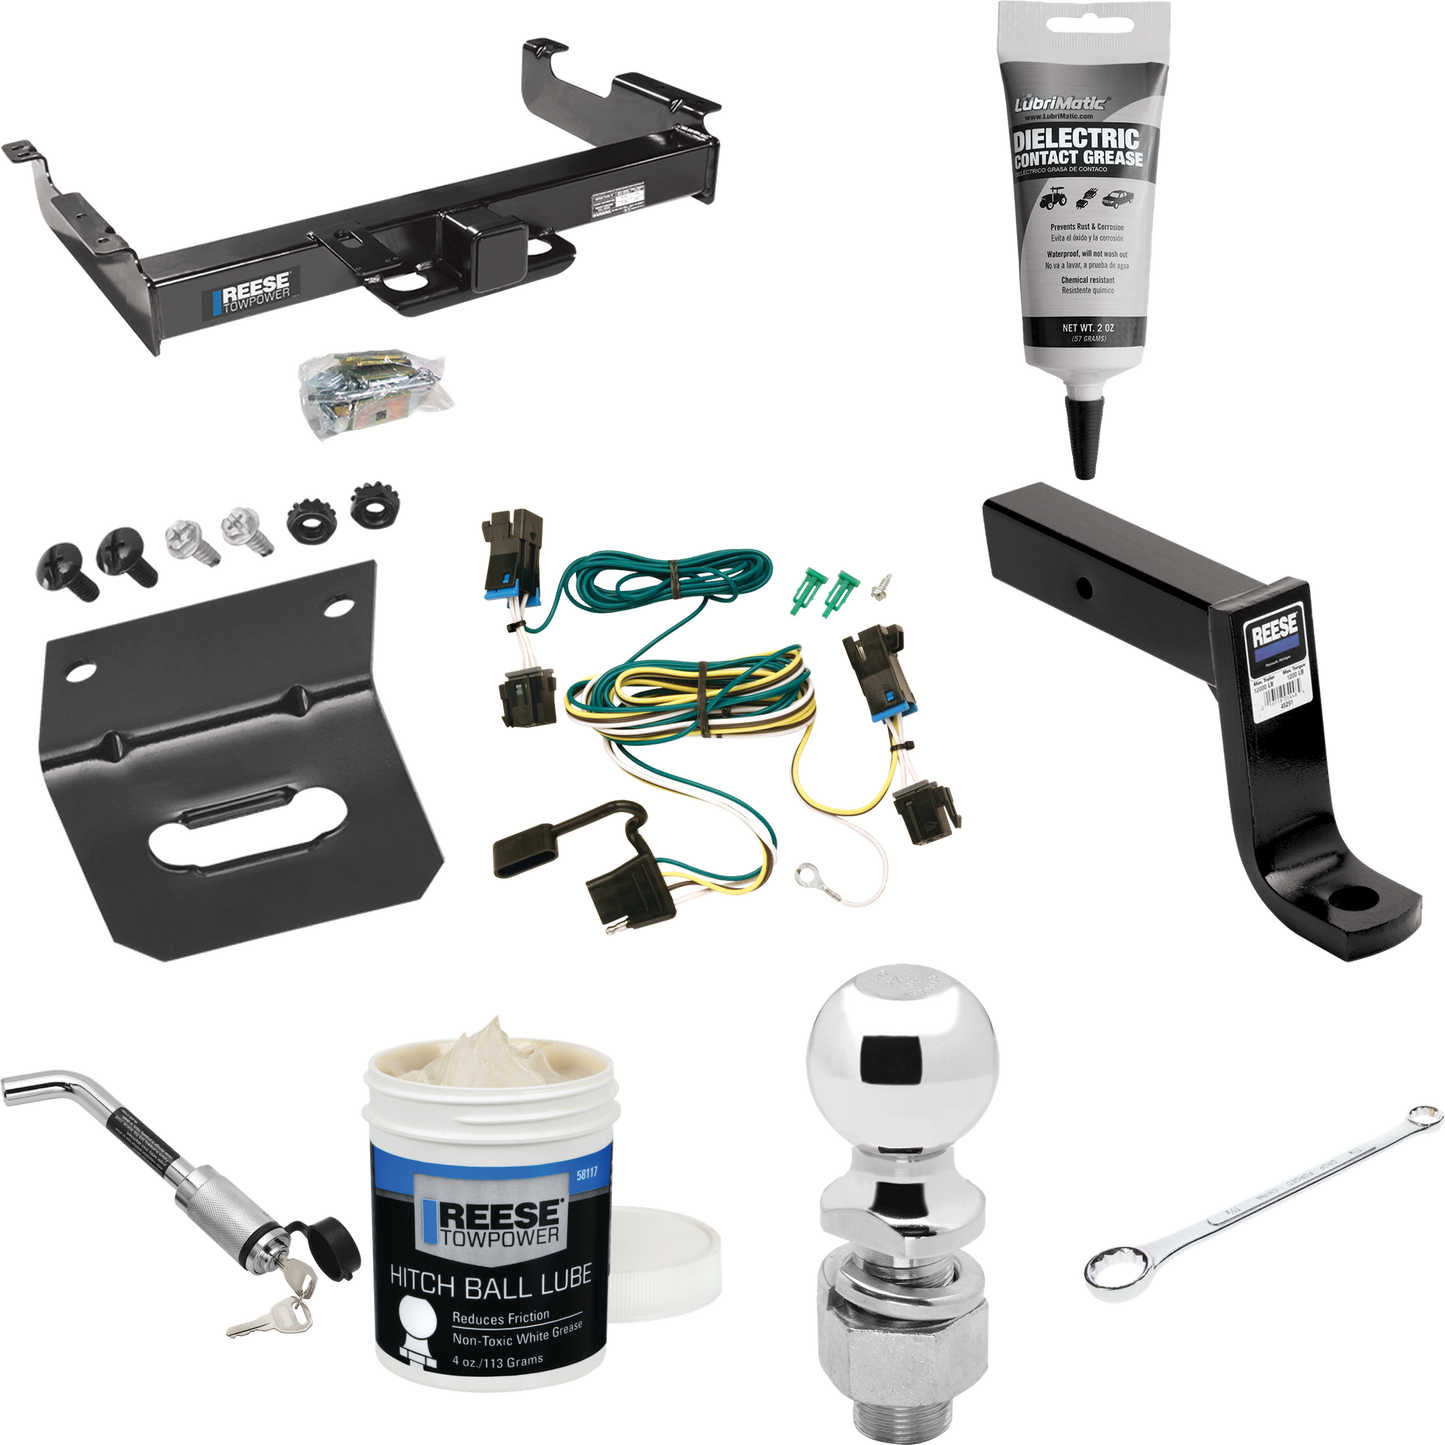 Fits 2003-2023 GMC Savana 2500 Trailer Hitch Tow PKG w/ 4-Flat Wiring Harness + Ball Mount w/ 7-3/4" Drop + Hitch Lock + 2-5/16" Ball + Wiring Bracket + Electric Grease + Ball Wrench + Ball Lube By Reese Towpower